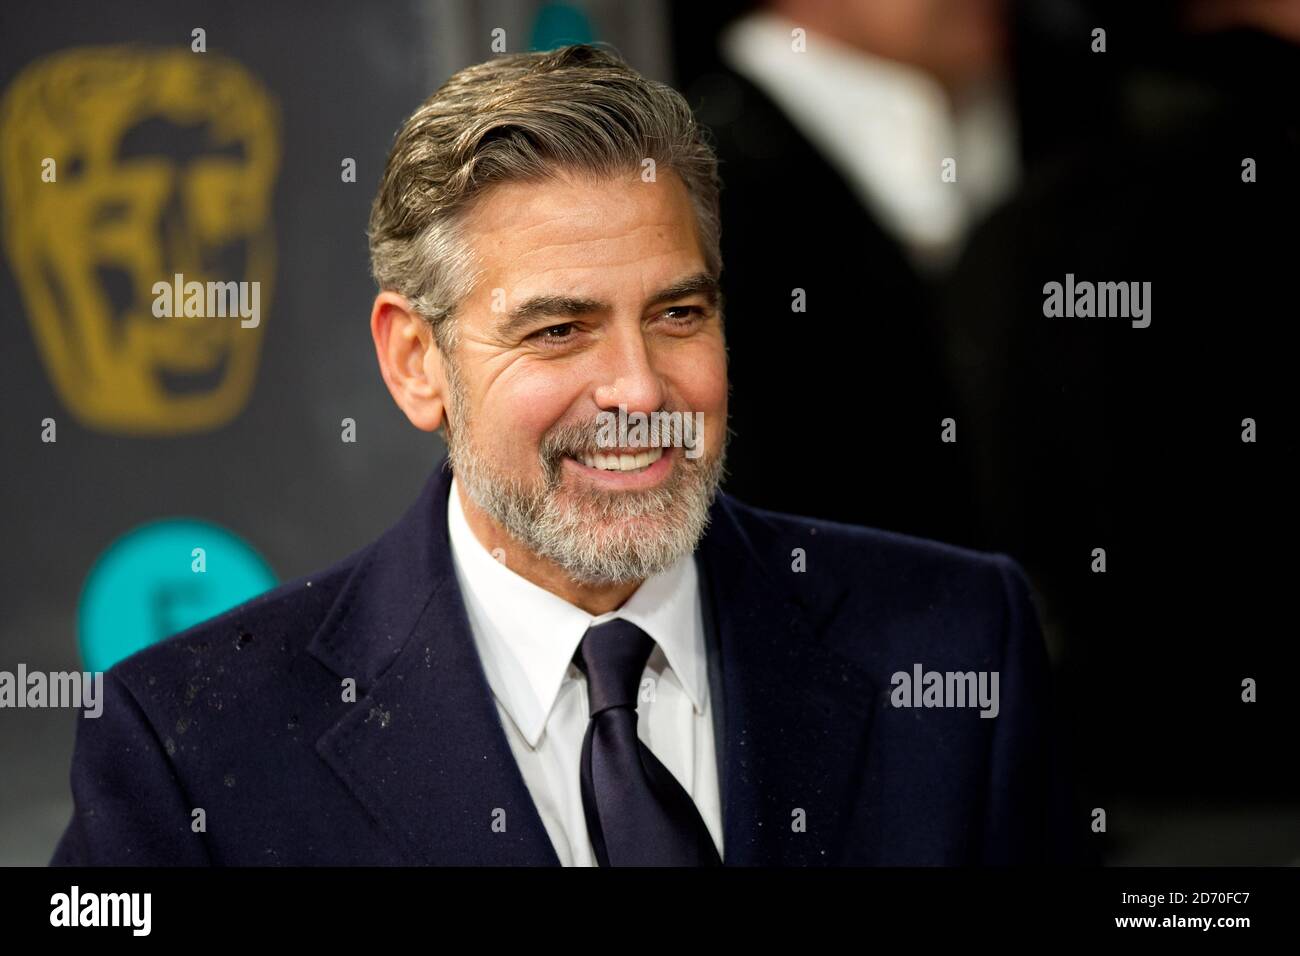 George Clooney attending the Bafta Awards, at the Royal Opera House in central London. Stock Photo